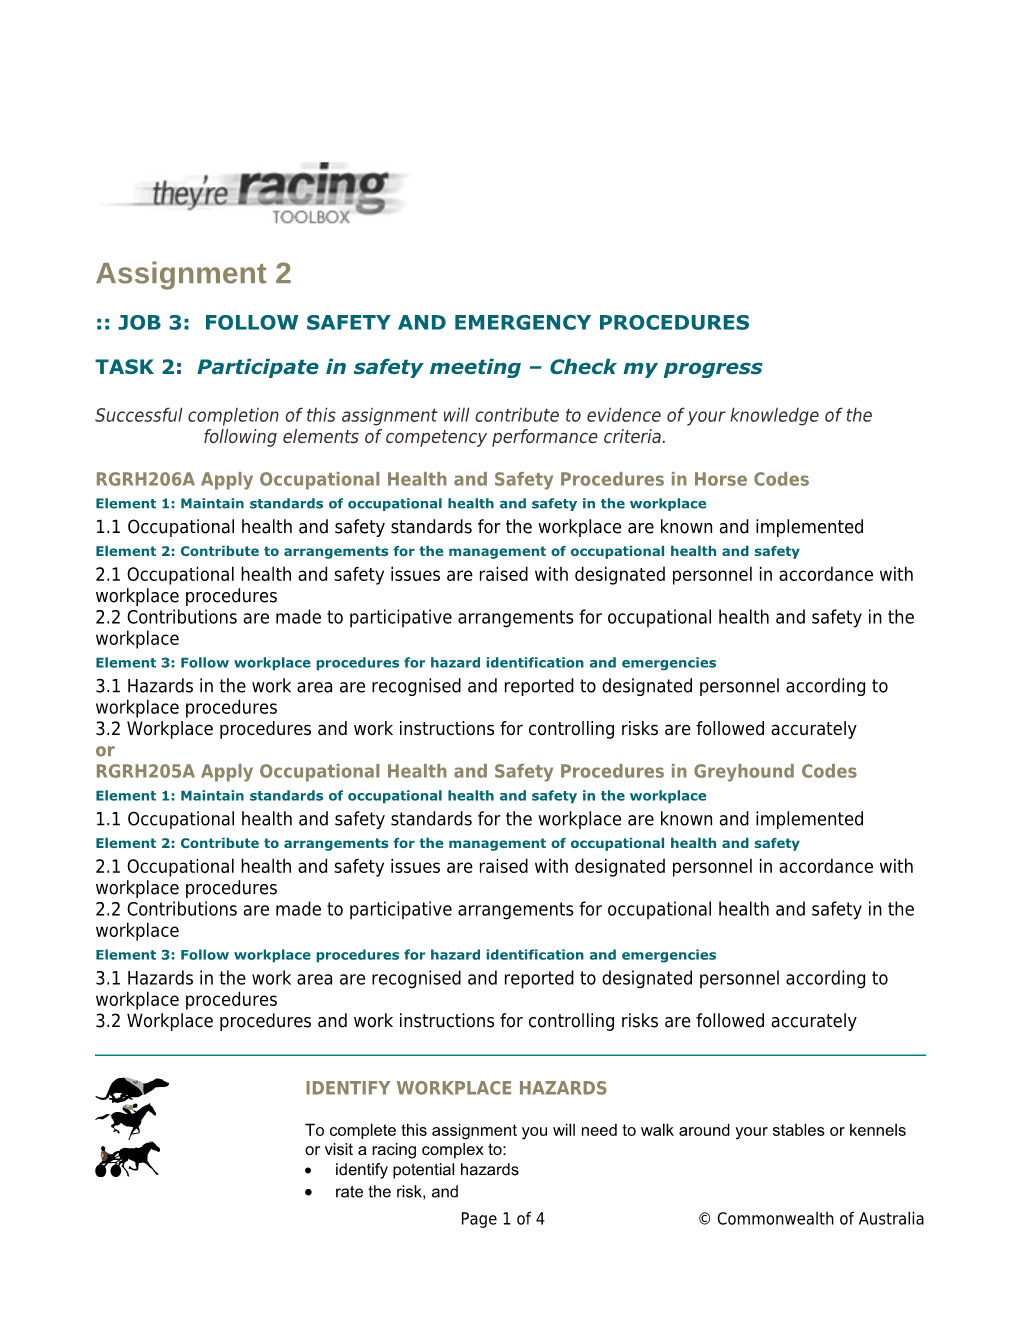 Job 3: Follow Safety and Emergency Procedures